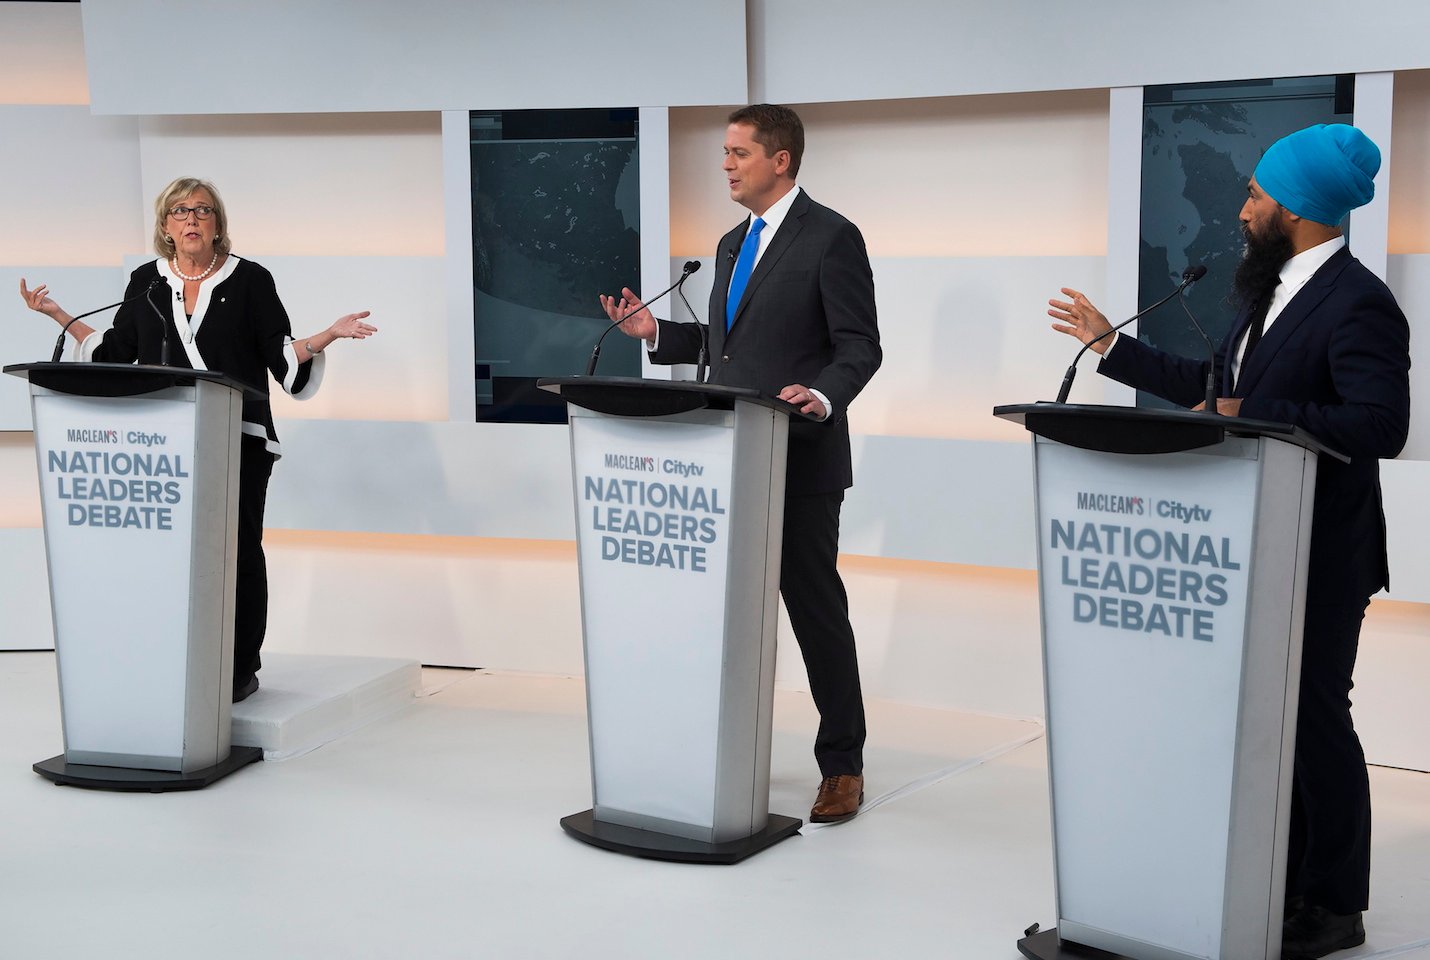 Green Party Leader Elizabeth May, left, Conservative Leader Andrew Scheer, centre, and NDP Leader Jagmeet Singh take part during the Maclean's/Citytv National Leaders Debate